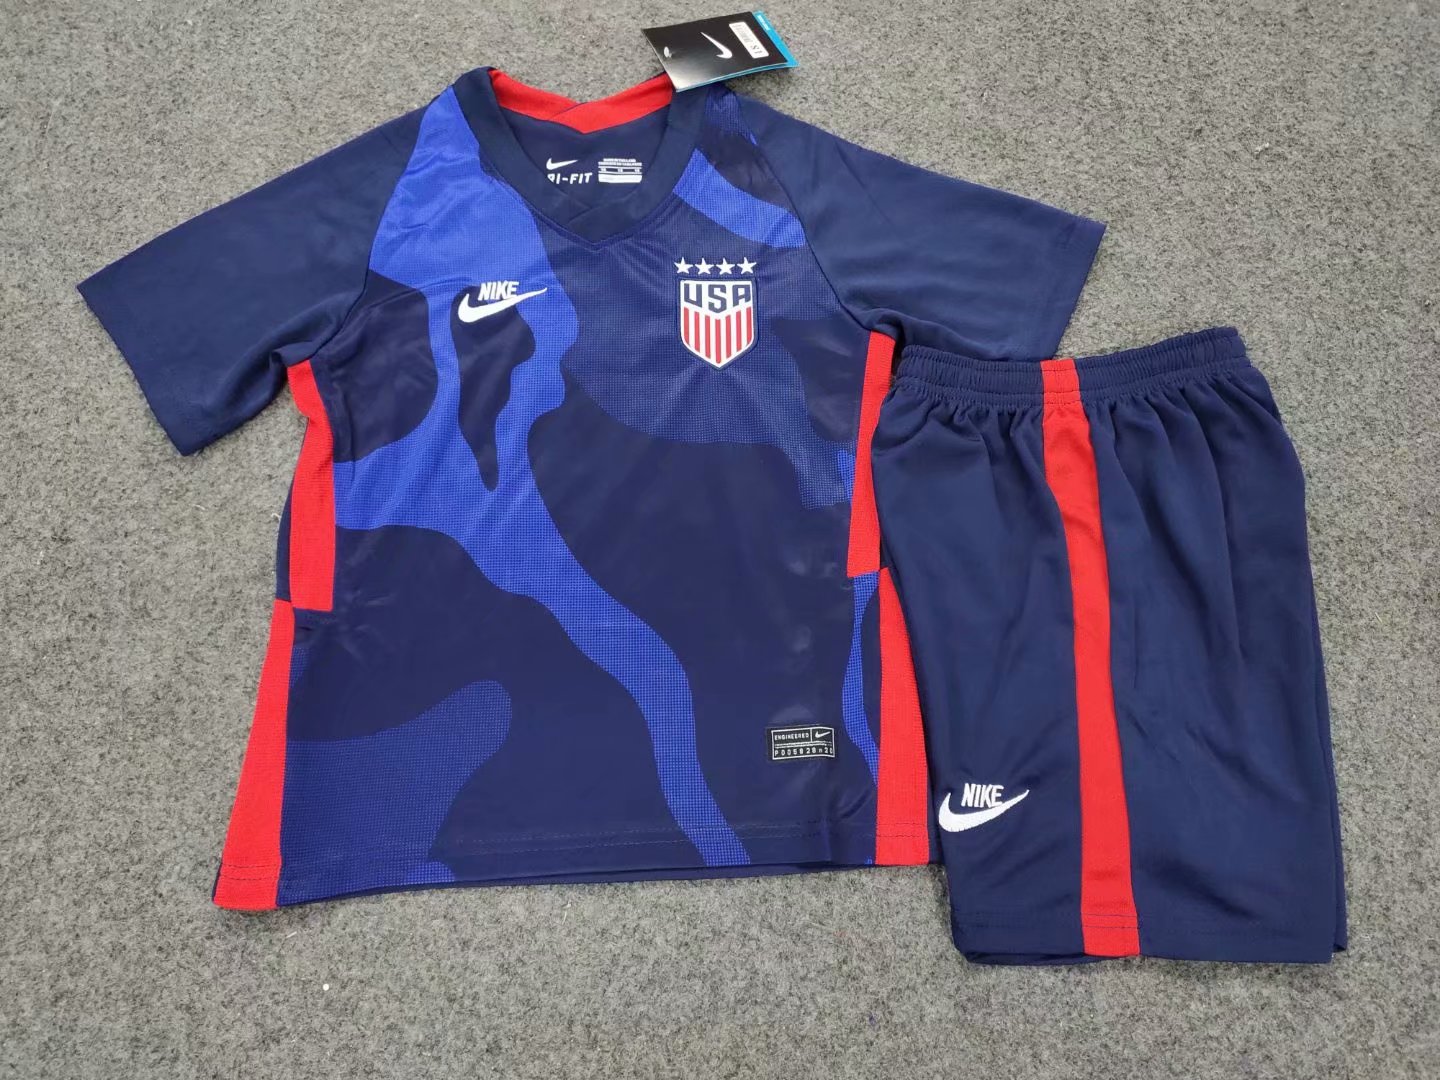 the United States of America home kids kit USA 2020 